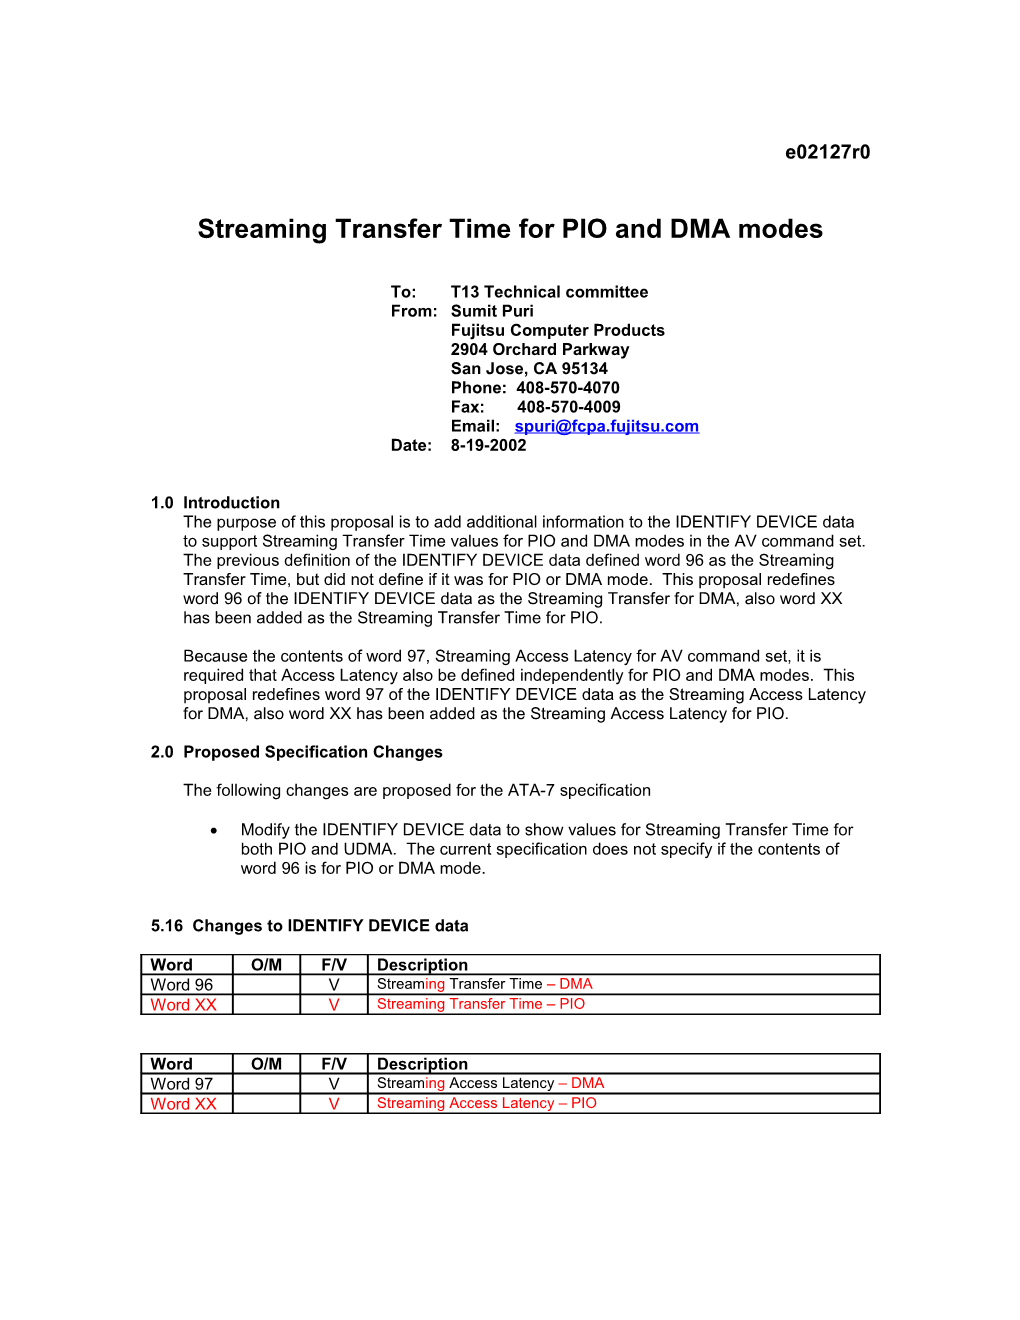 Streaming Transfer Time for PIO and DMA Modes